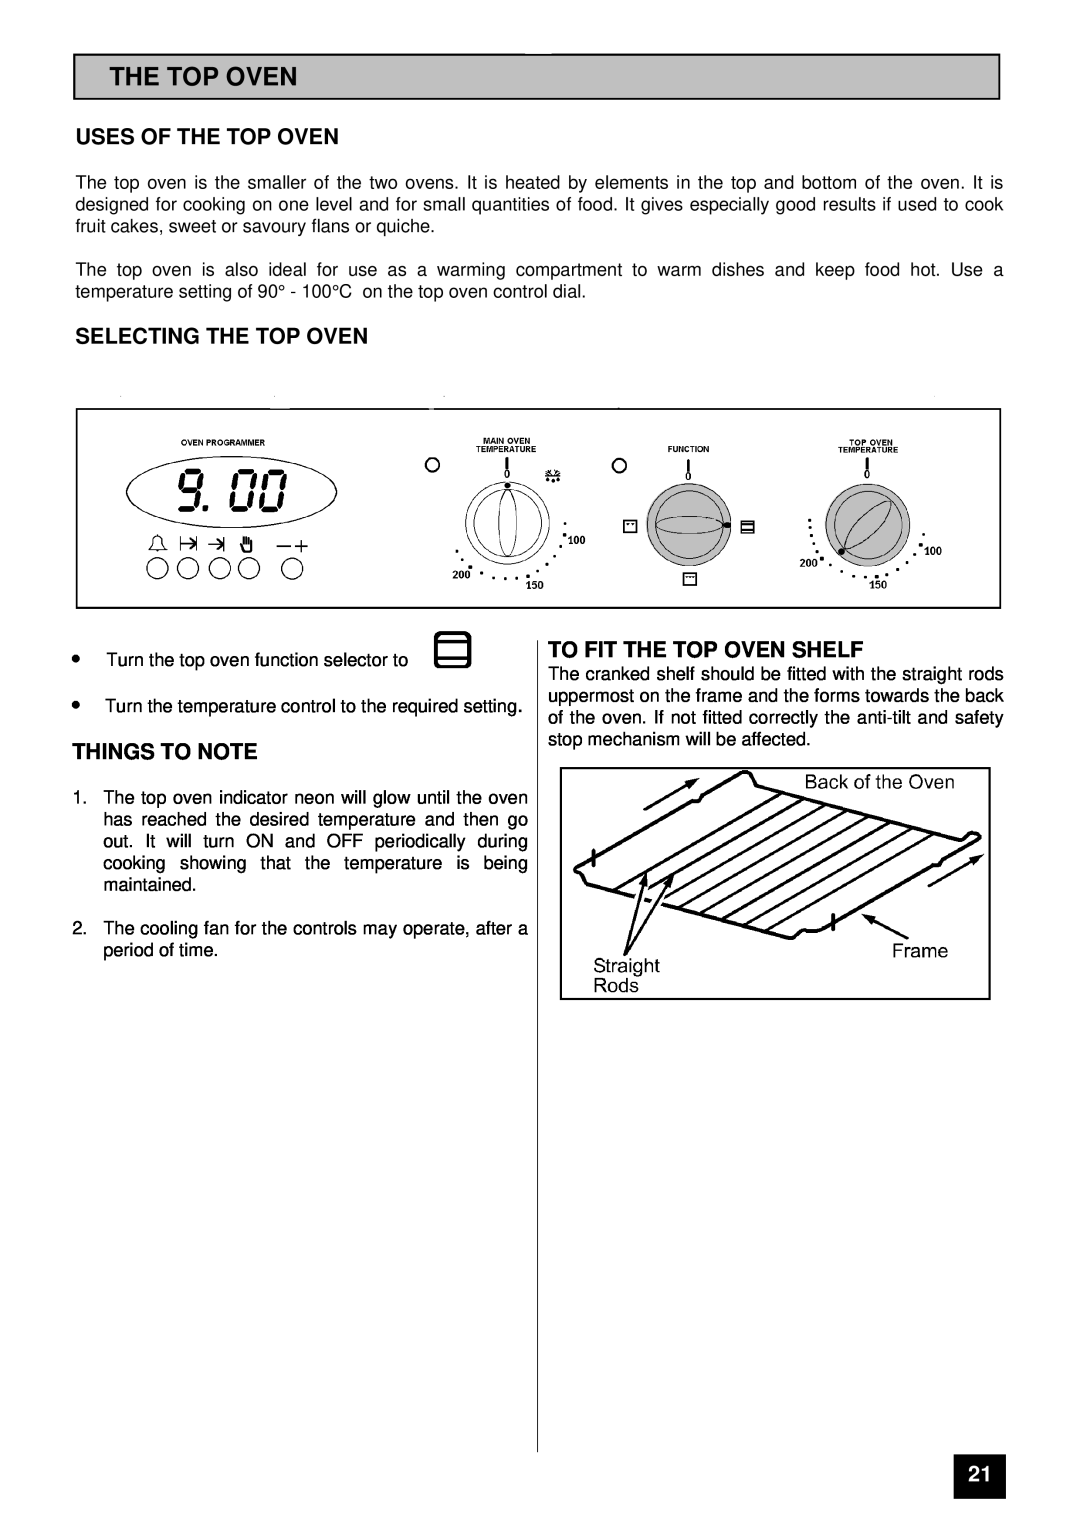 Tricity Bendix TBD903 Uses Of The Top Oven, Selecting The Top Oven, To Fit The Top Oven Shelf, Things To Note 